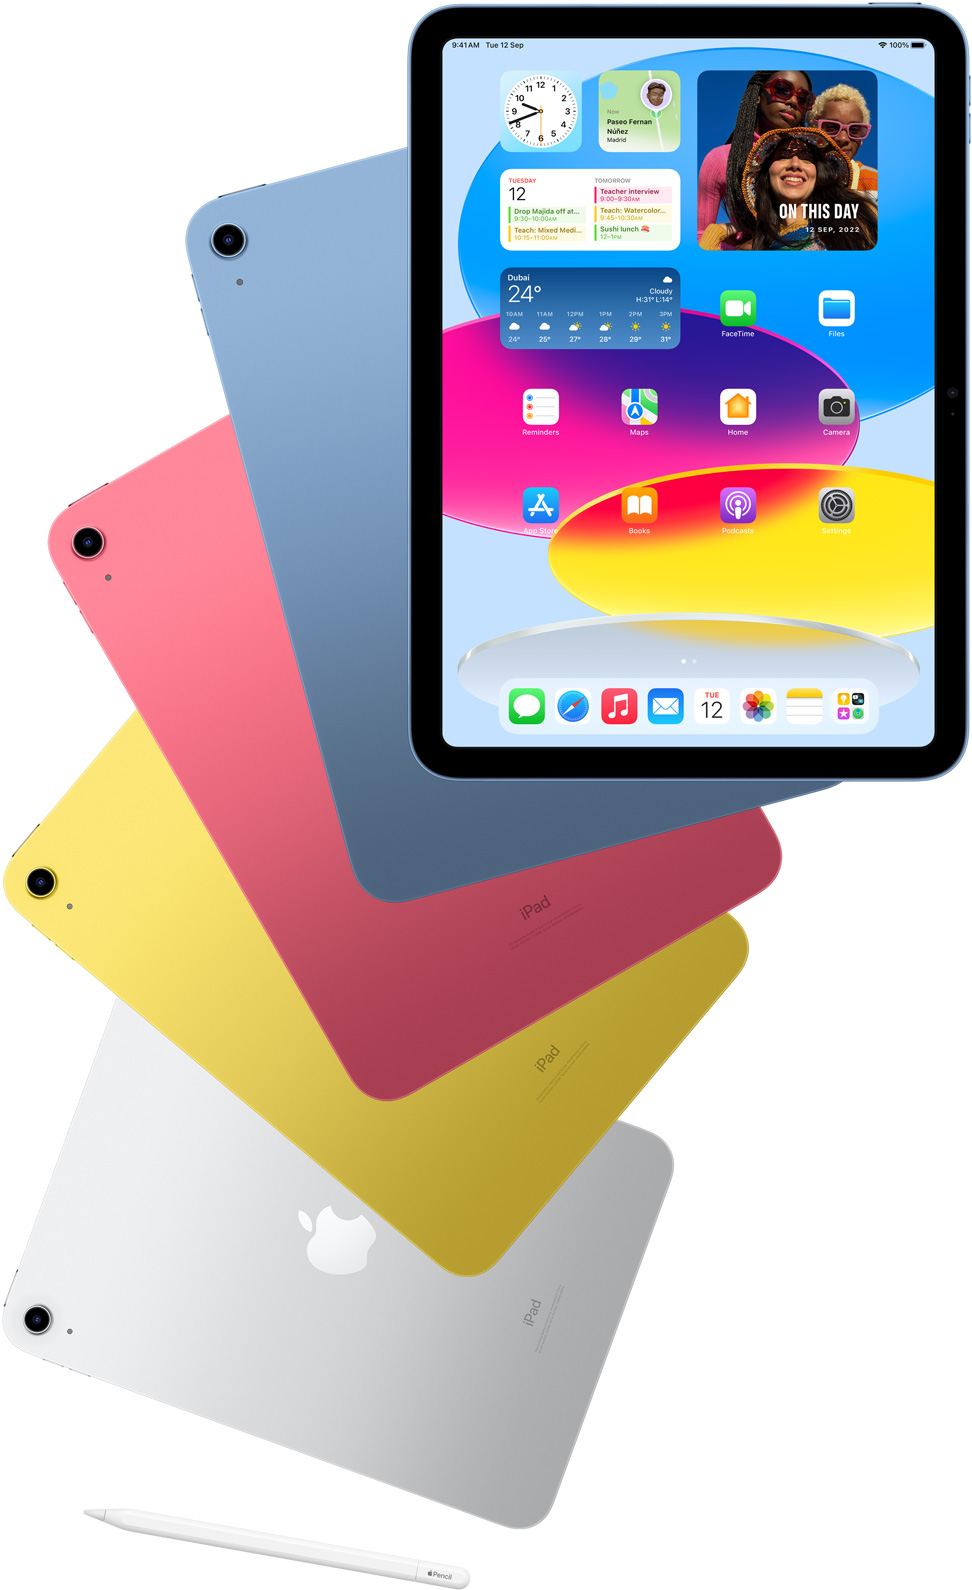 Front view iPad shows the home screen with blue, pink, yellow, and silver rear-facing iPads. An Apple Pencil sits nears the arranged iPad models.